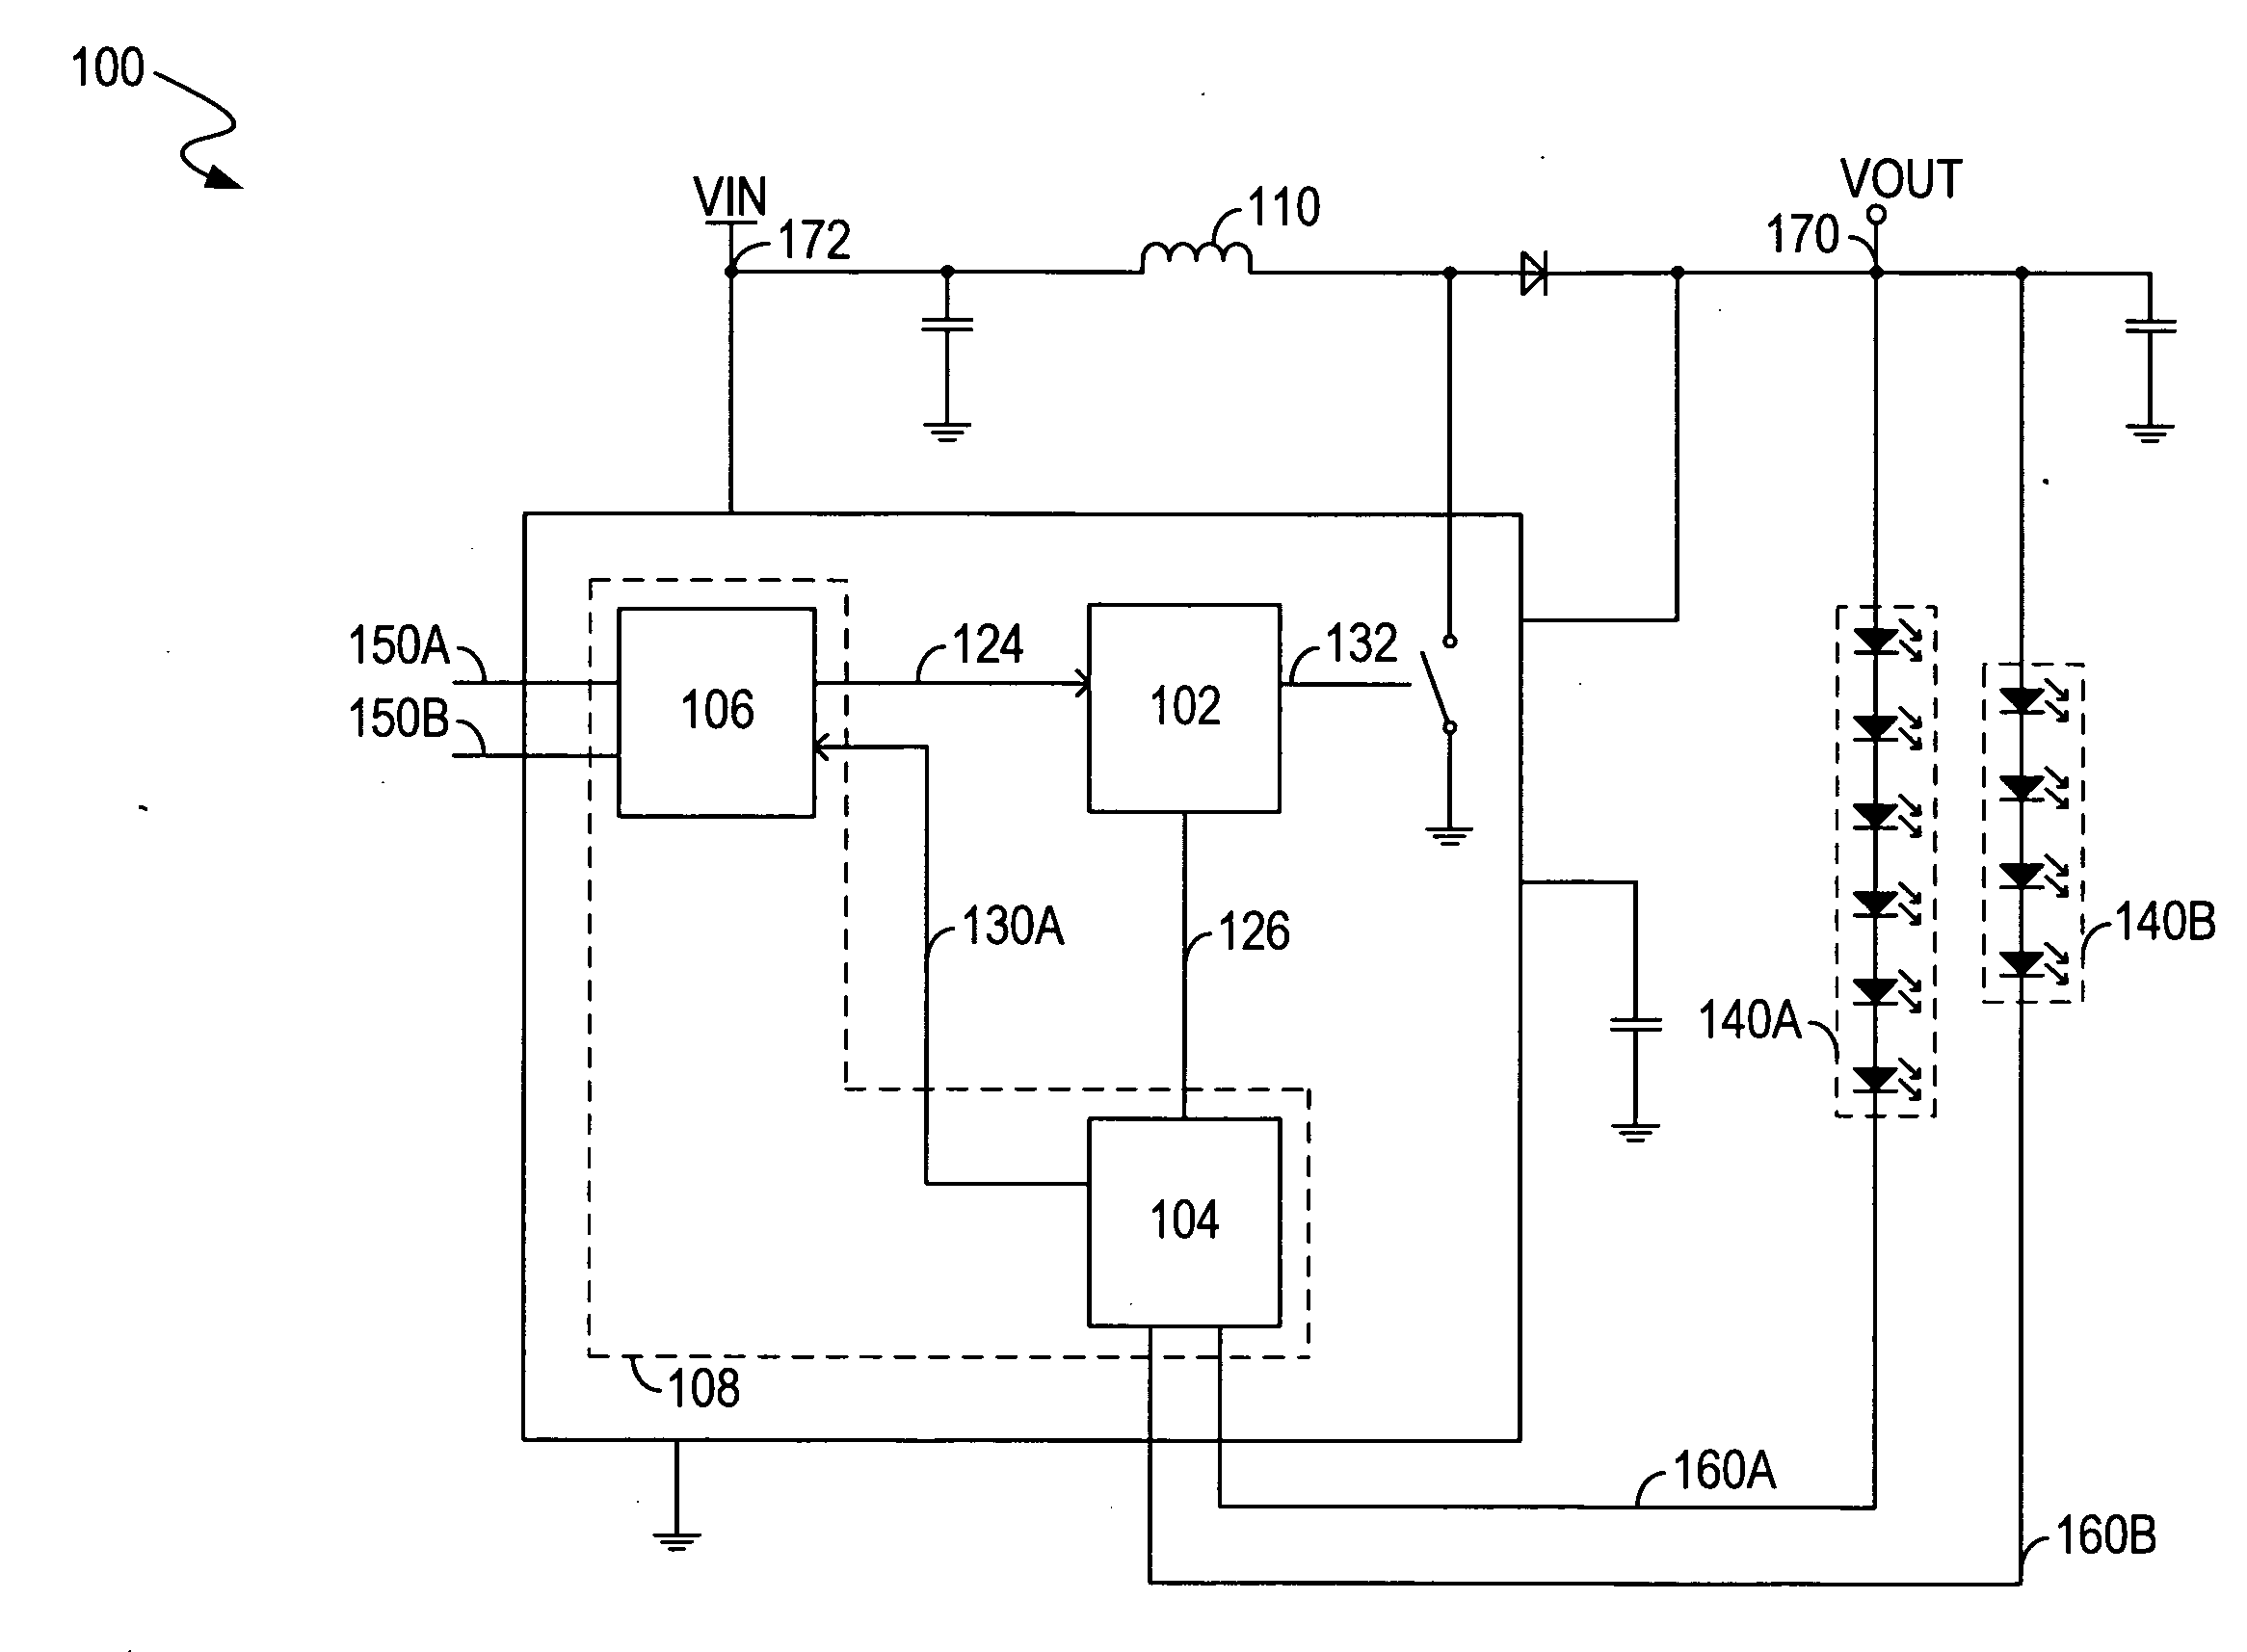 Power supply topologies with pwm frequency control